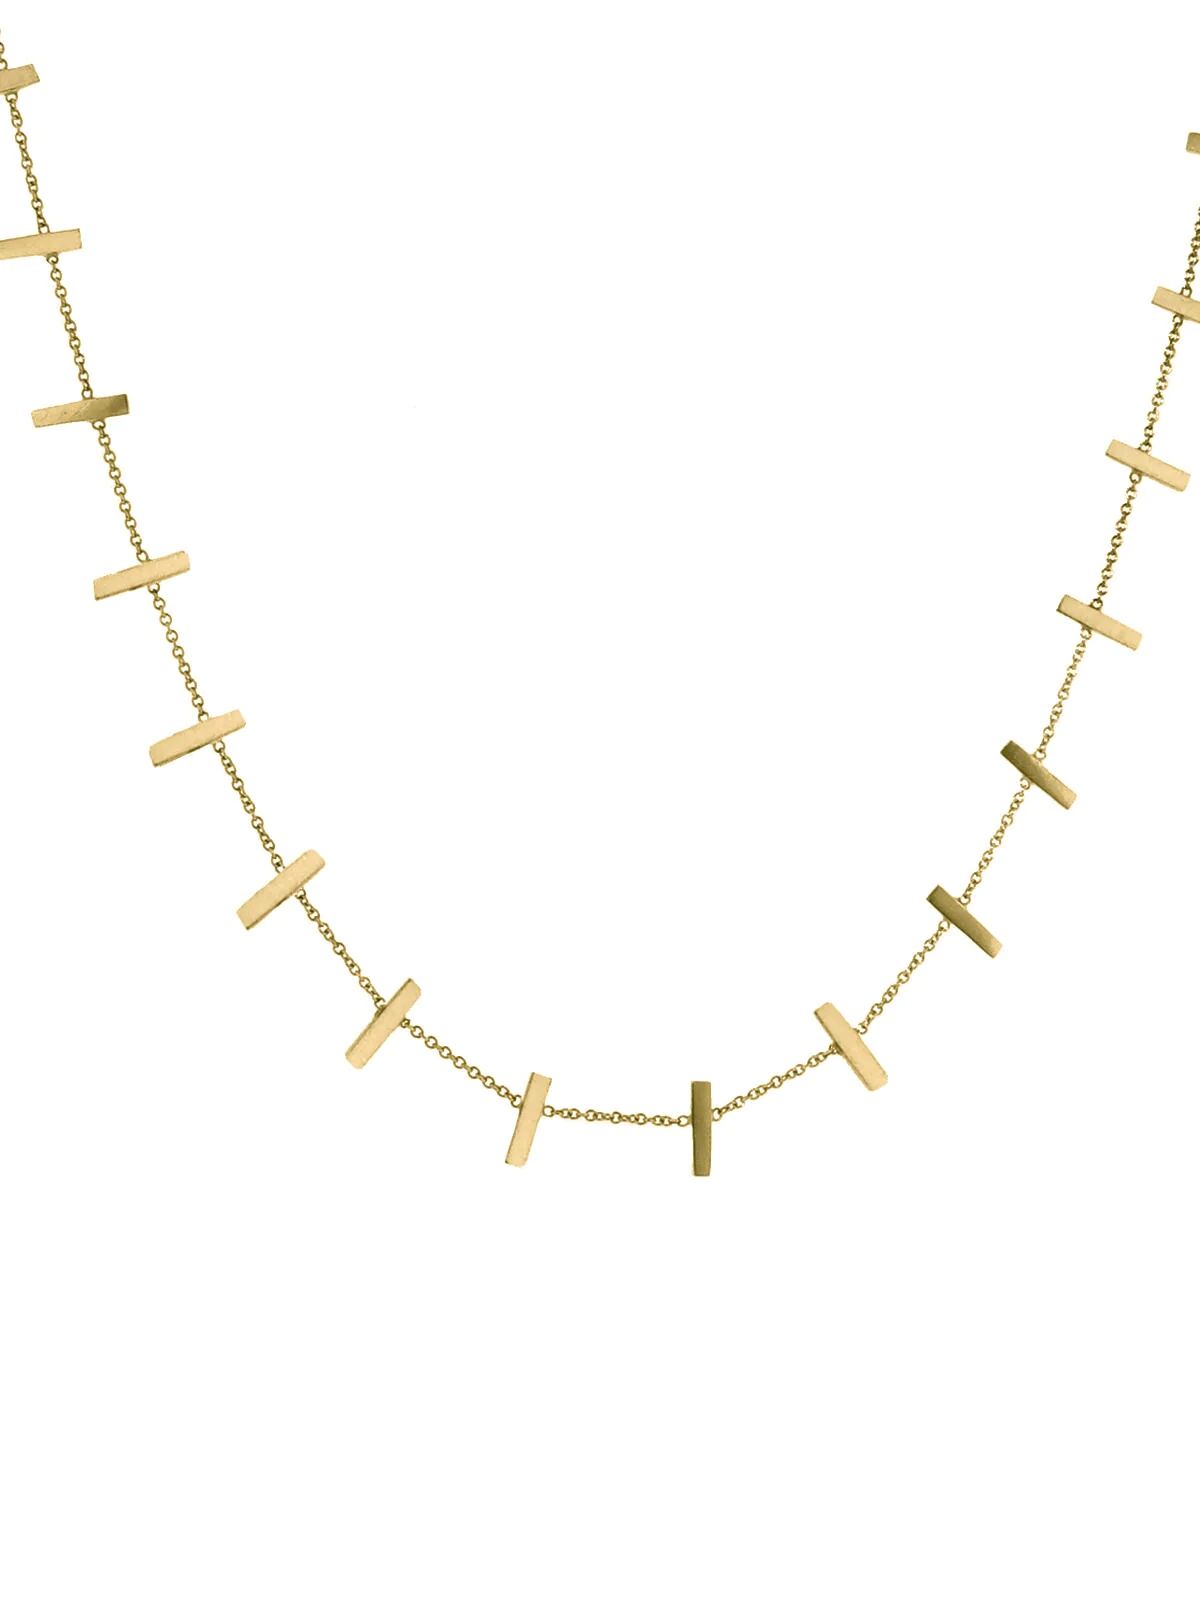 18 Inch Cross Bar Chain Yellow Gold Necklace | YLANG 23